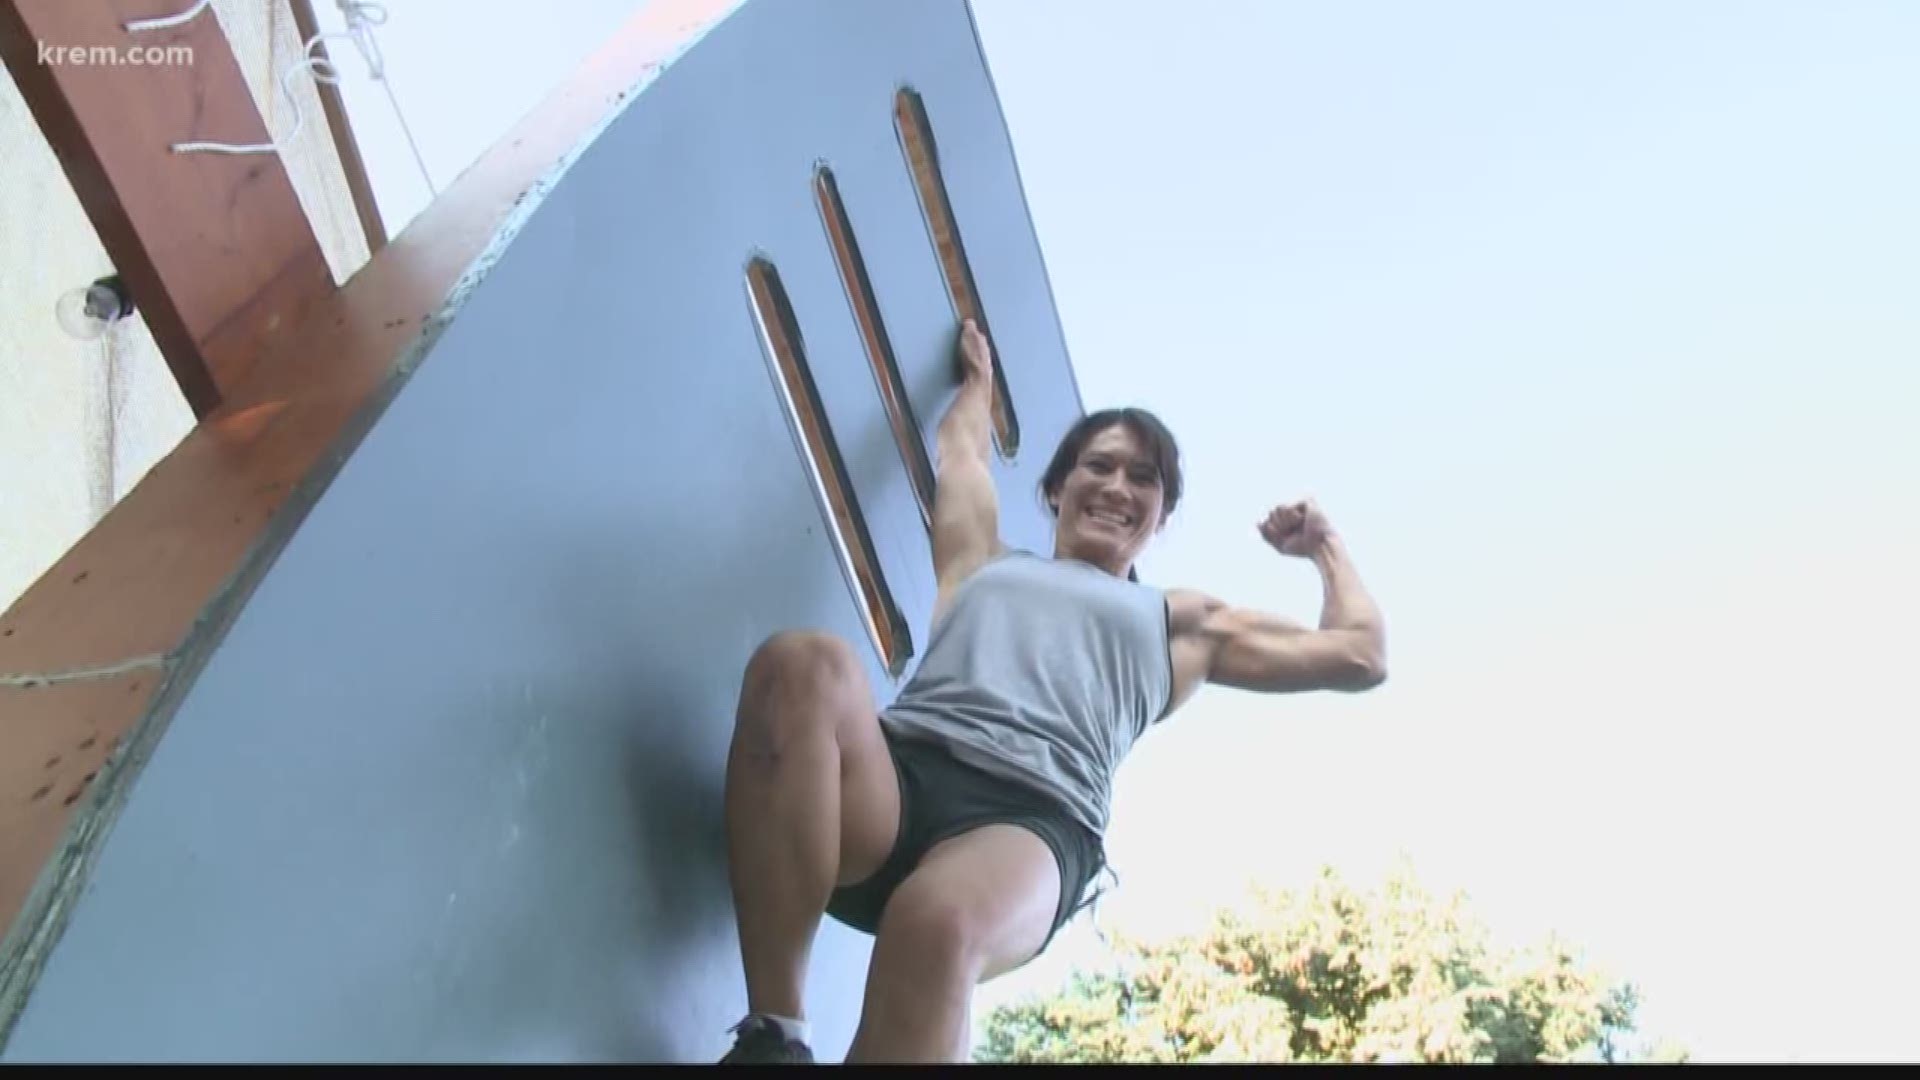 KREM's Brenna Greene spoke with Sandy Zimmerman, a Spokane woman who became the first mother to hit the buzzer on American Ninja Warrior, about her journey to the competition.